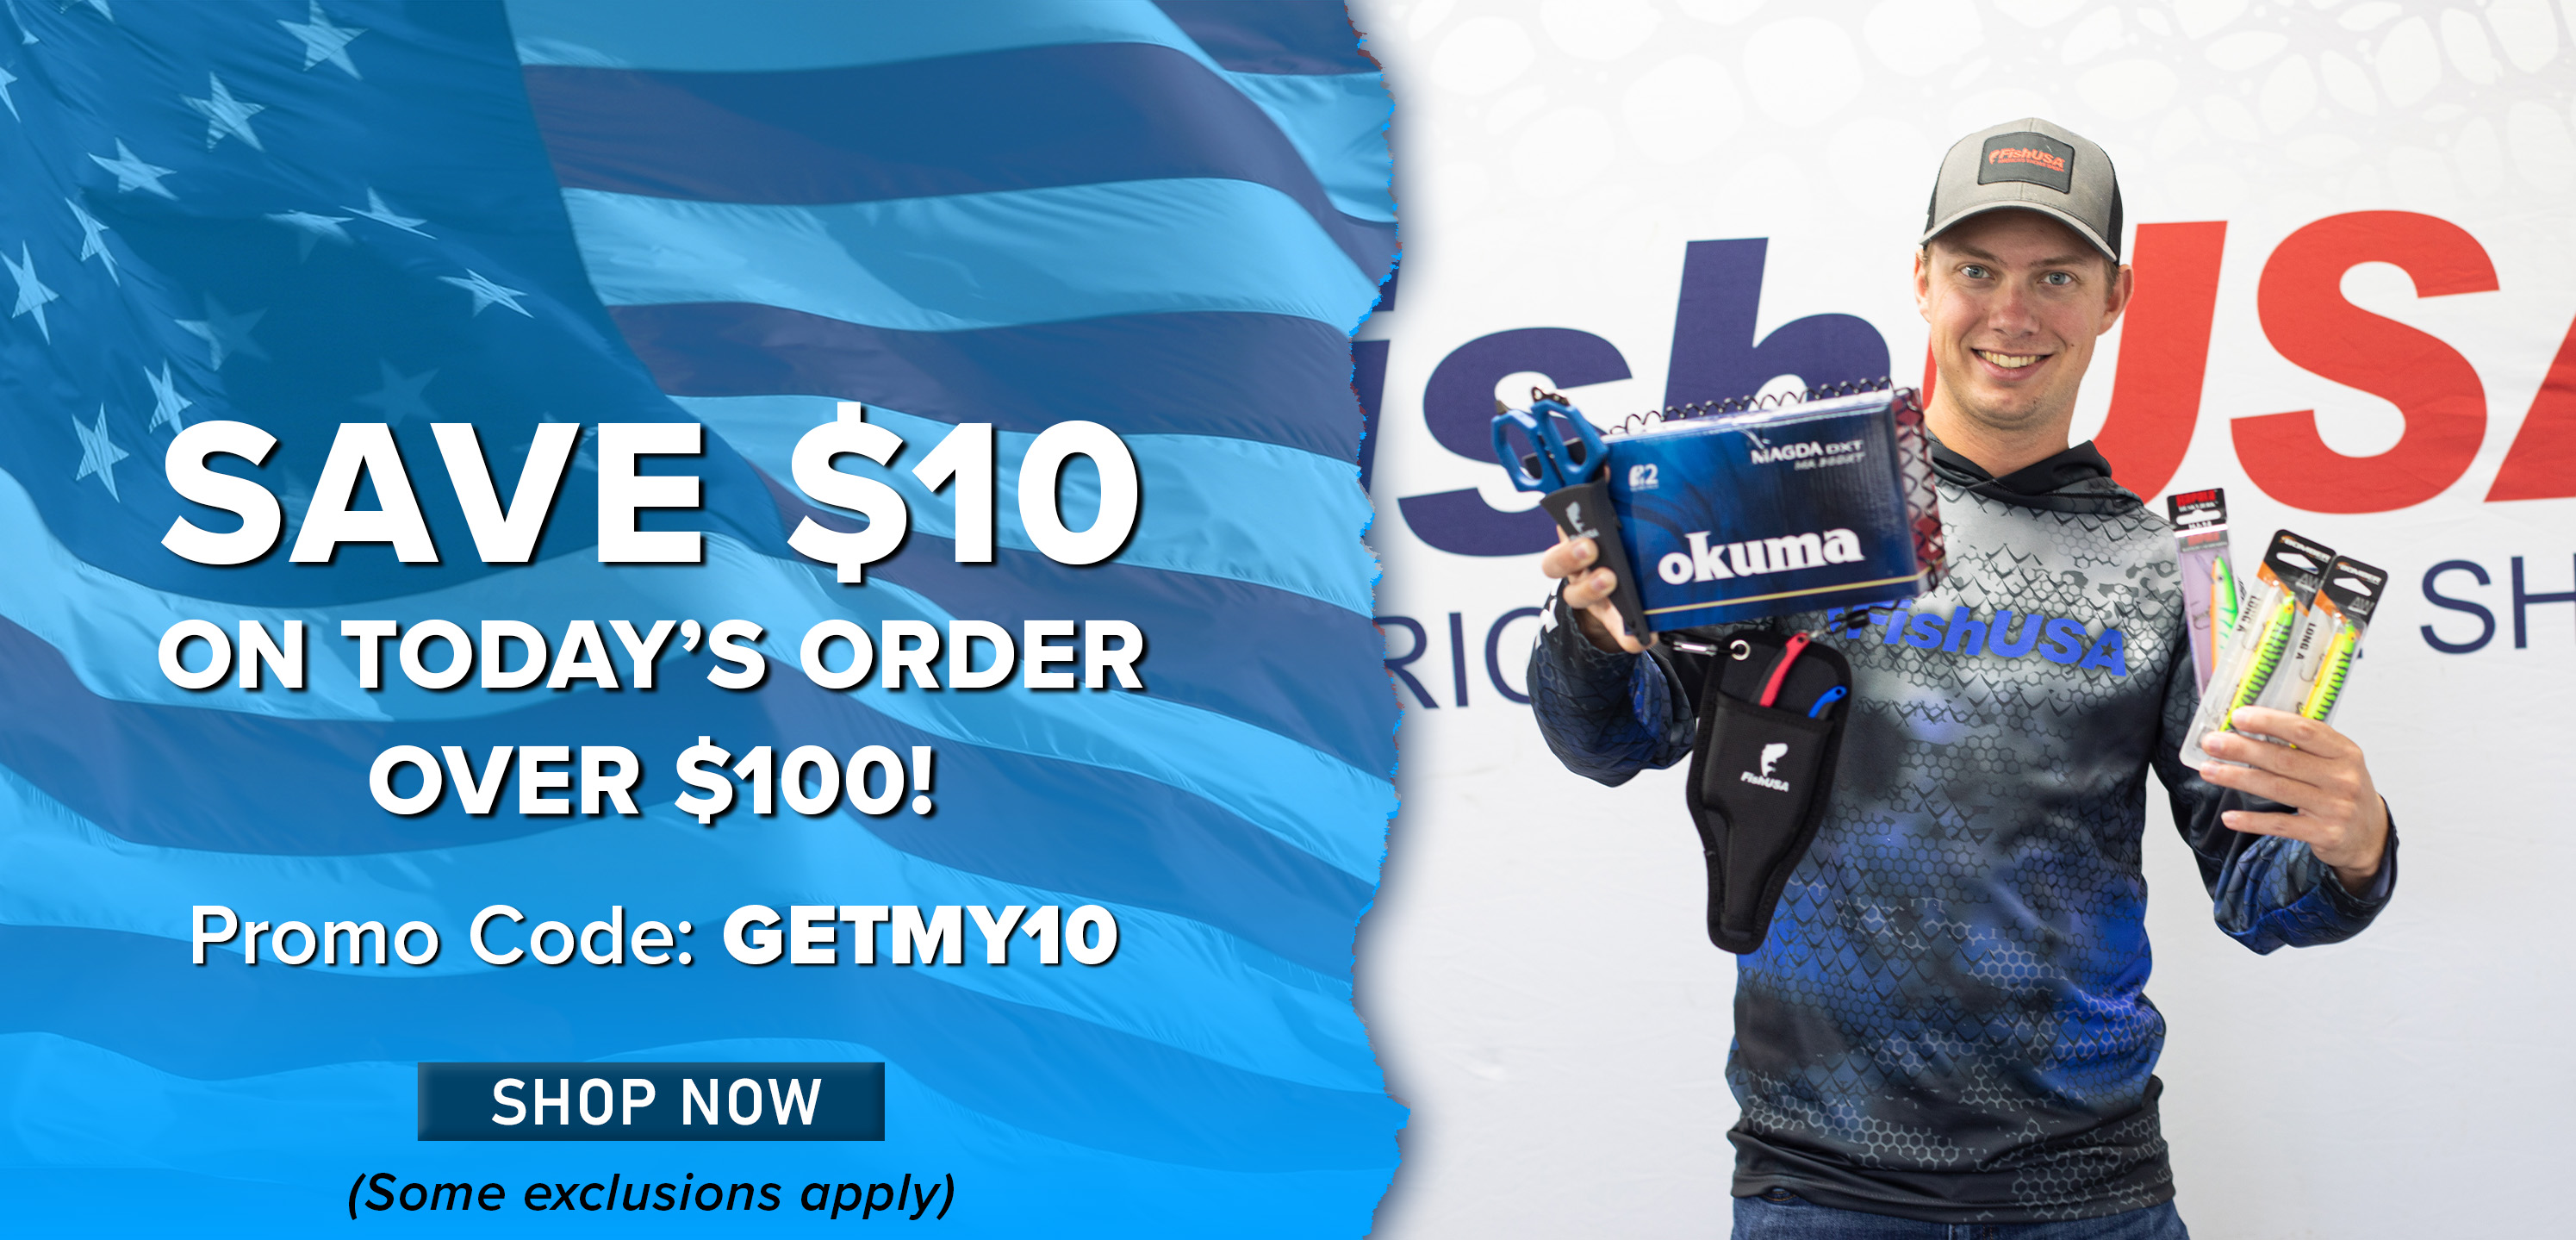 Save $10 On Today's Order Over $100! Promo Code: GETMY10 Shop Now (Some exclusions apply.)